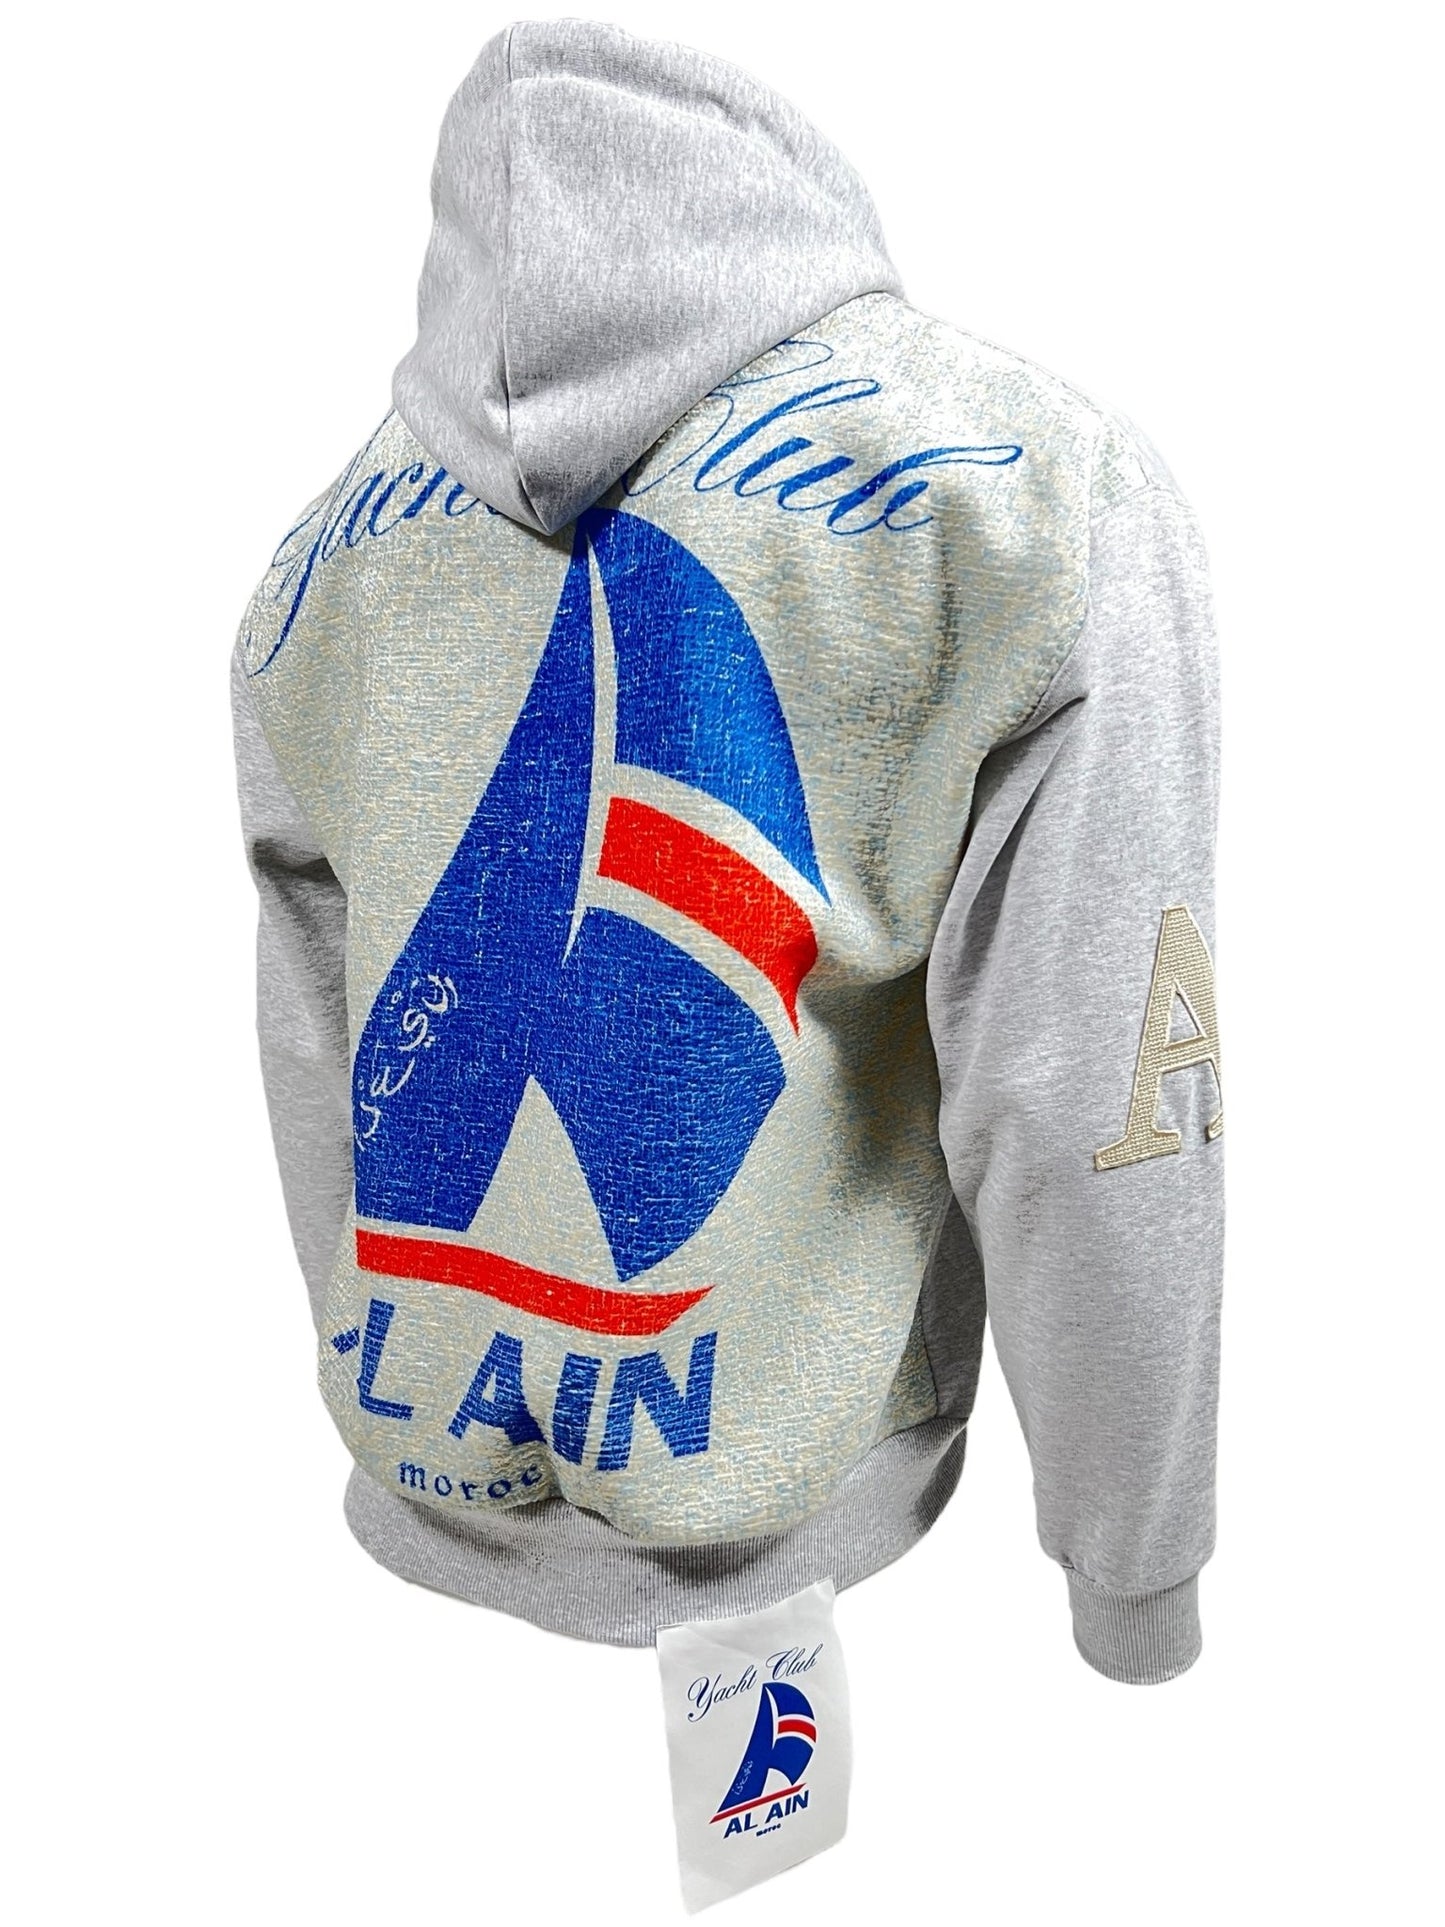 A grey AL AIN AHOX S150 YACHT LIMITED hoodie with a large blue and red sailboat graphic and "Yacht Club Alain" printed on the back. Made from 100% cotton, the front features patches with the letter "A" and a small tag with the same sailboat logo.